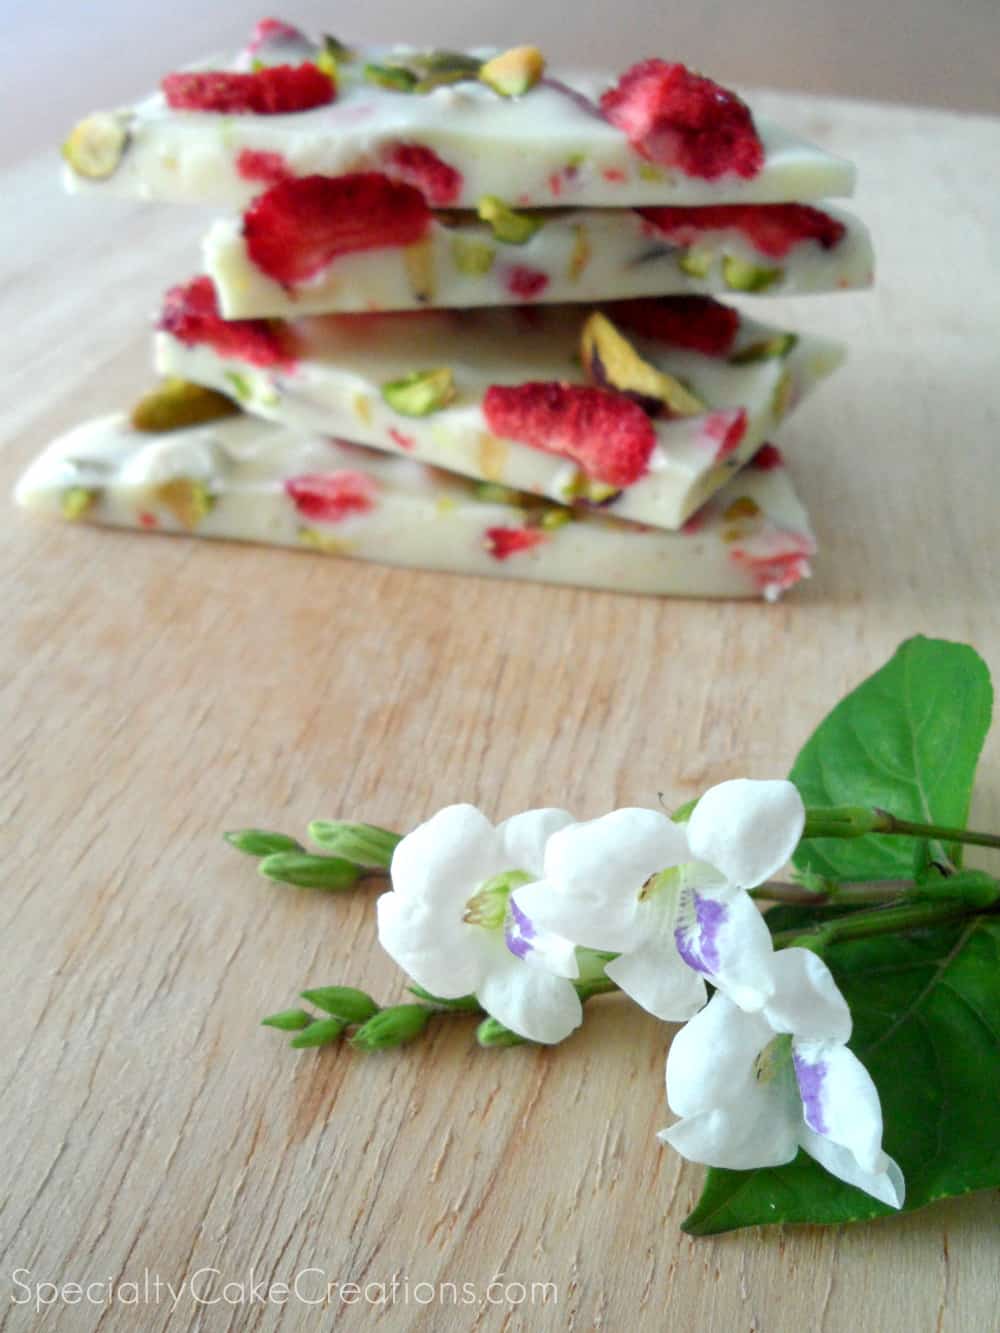 Colorful White Chocolate Bark with flower